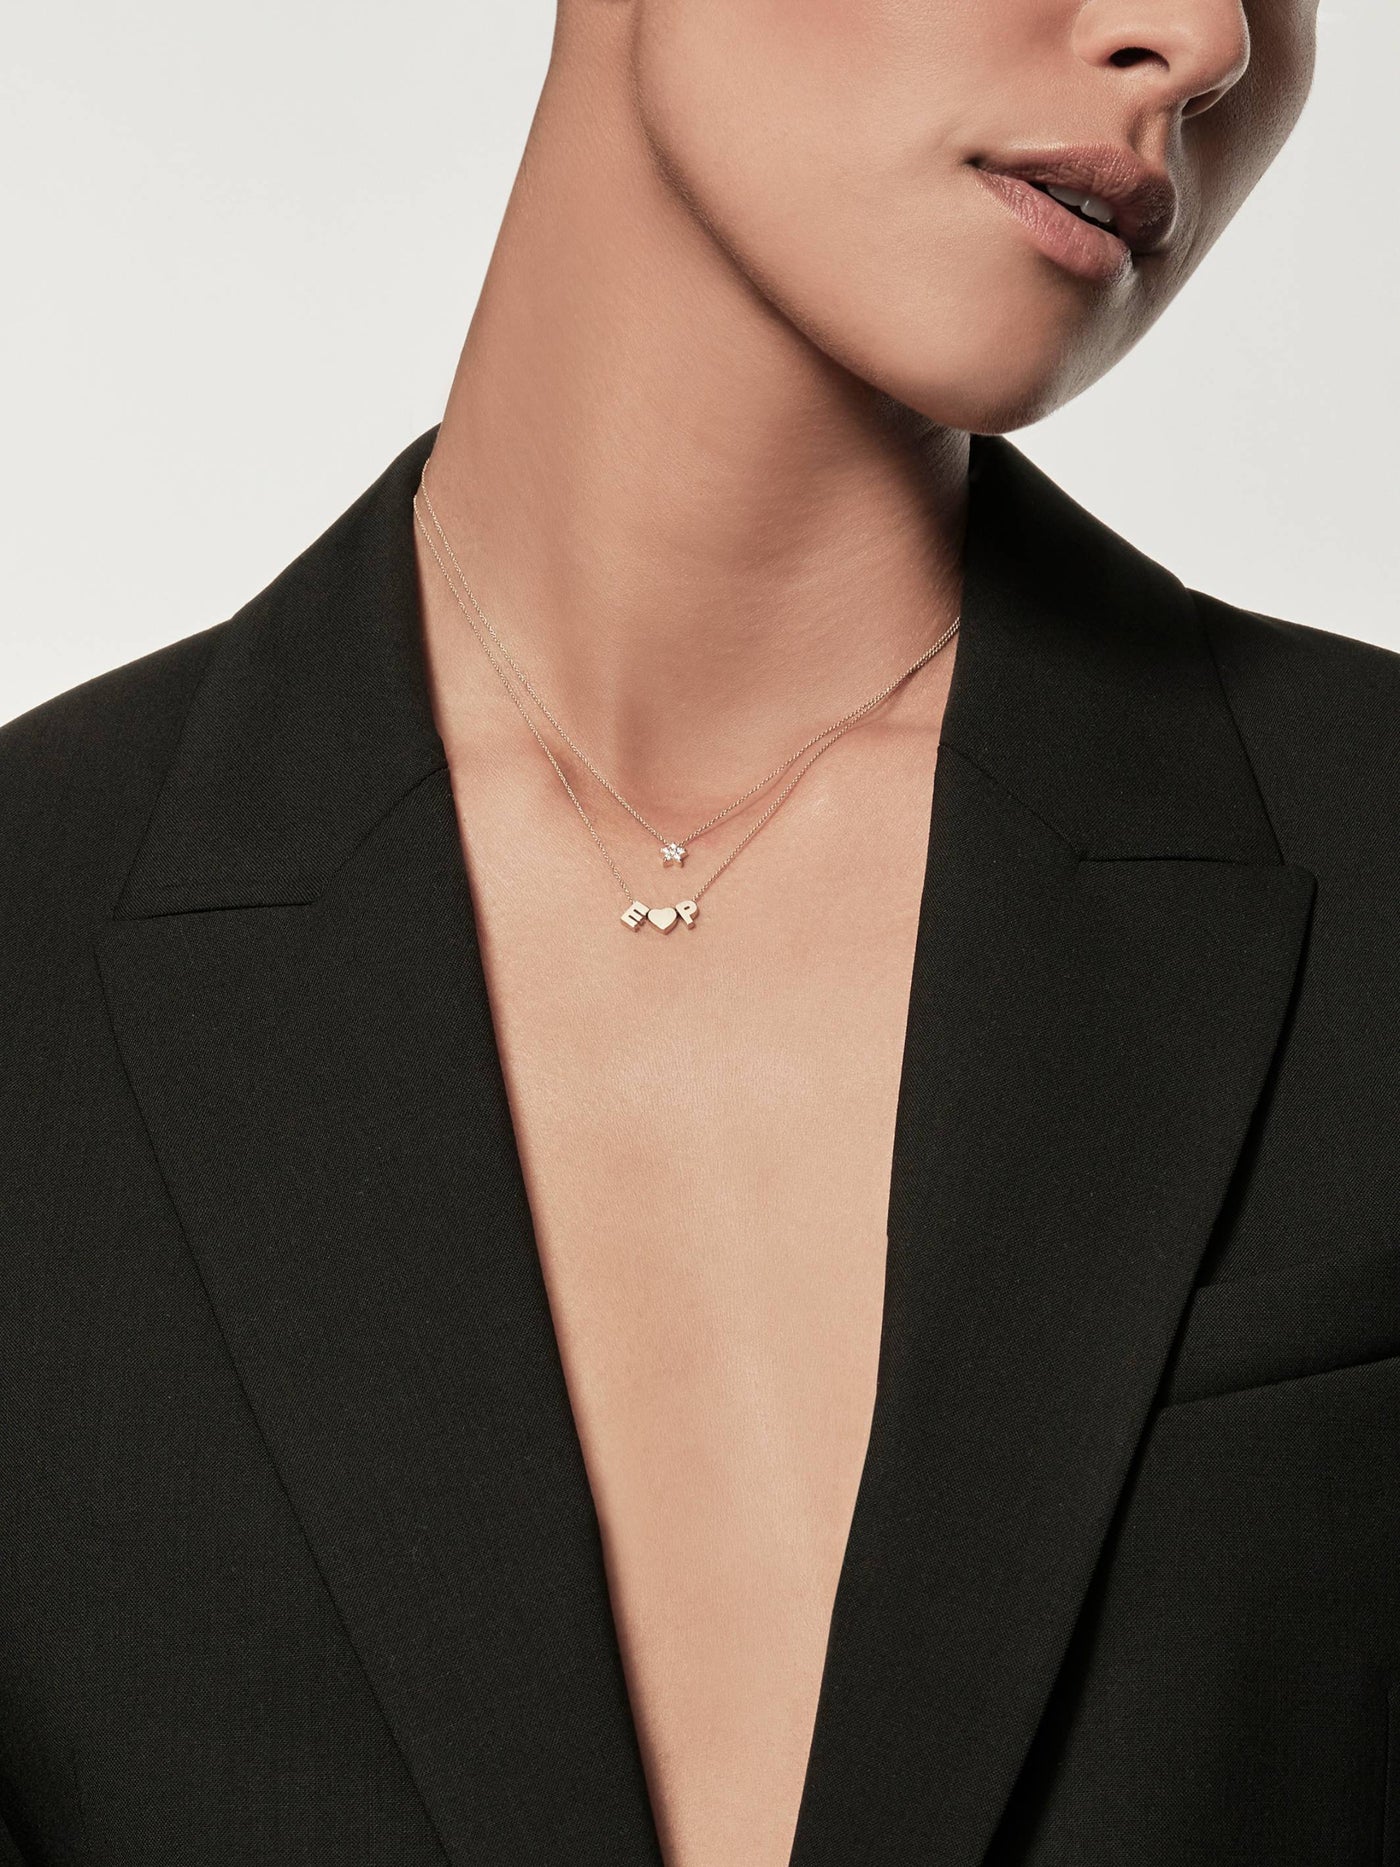 Model wearing a Miniature three-dimensional star in 18k solid gold and diamonds, thread onto an adjustable chain.